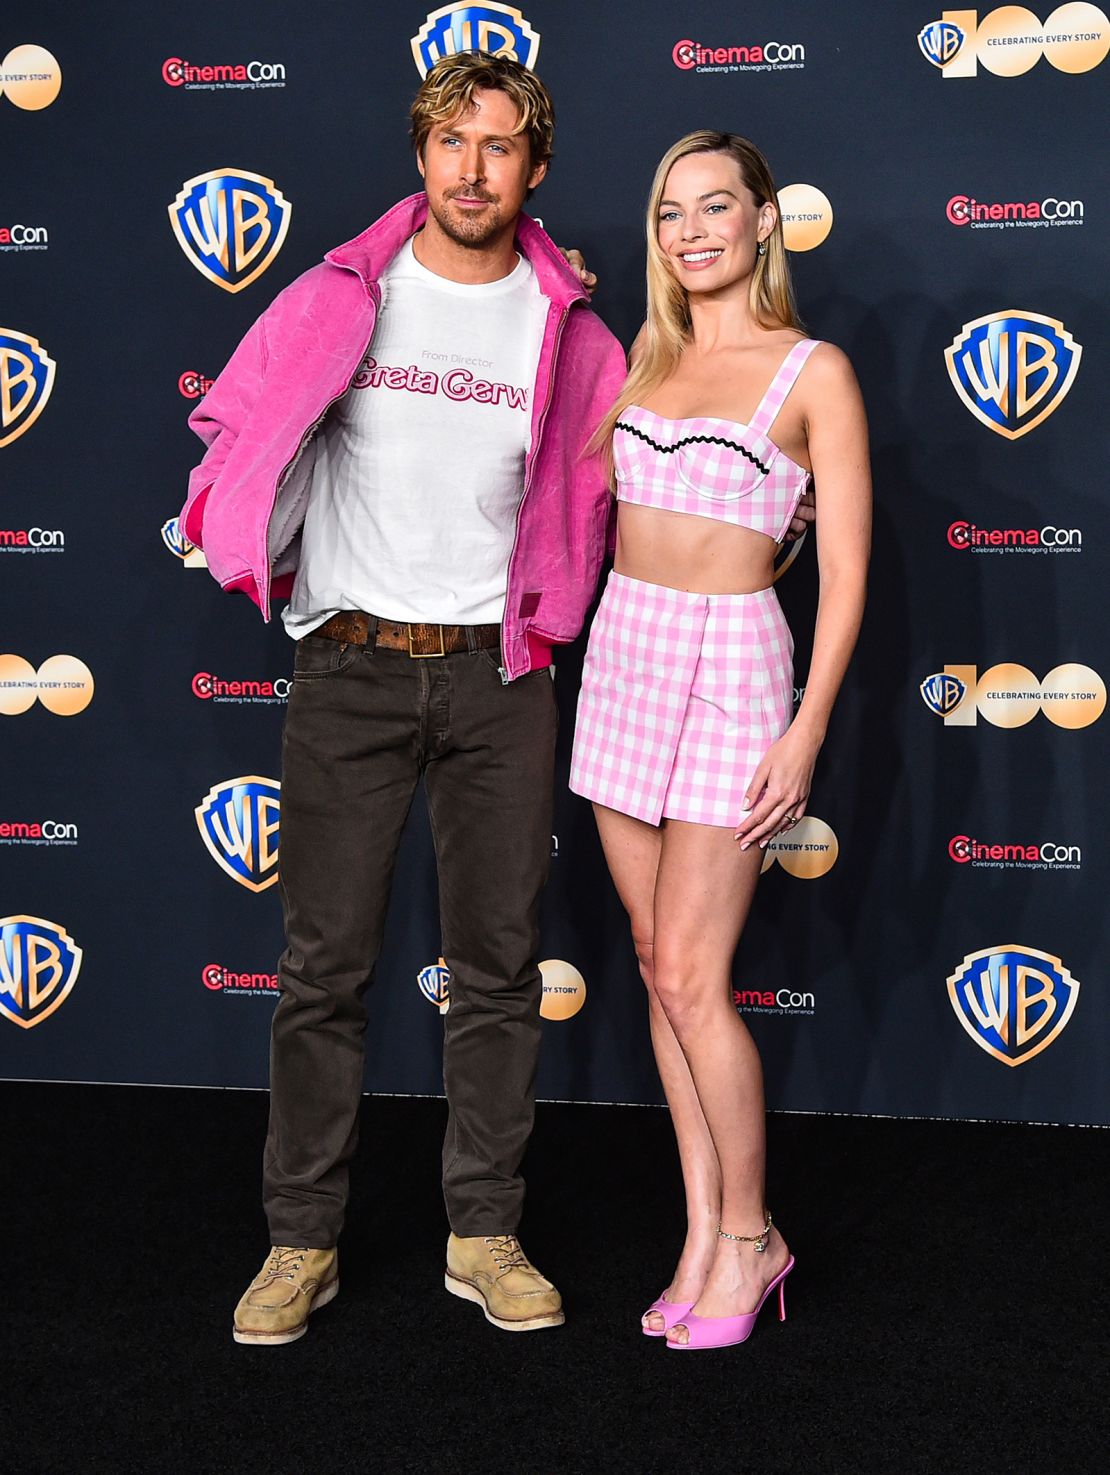 LAS VEGAS, NEVADA - APRIL 25: (L-R) Ryan Gosling and Margot Robbie attend the State of the Industry and Warner Bros. Pictures Presentation at The Colosseum at Caesars Palace during CinemaCon, the official convention of the National Association of Theatre Owners, on April 25, 2023, in Las Vegas, Nevada. (Photo by Alberto E. Rodriguez/Getty Images for CinemaCon)